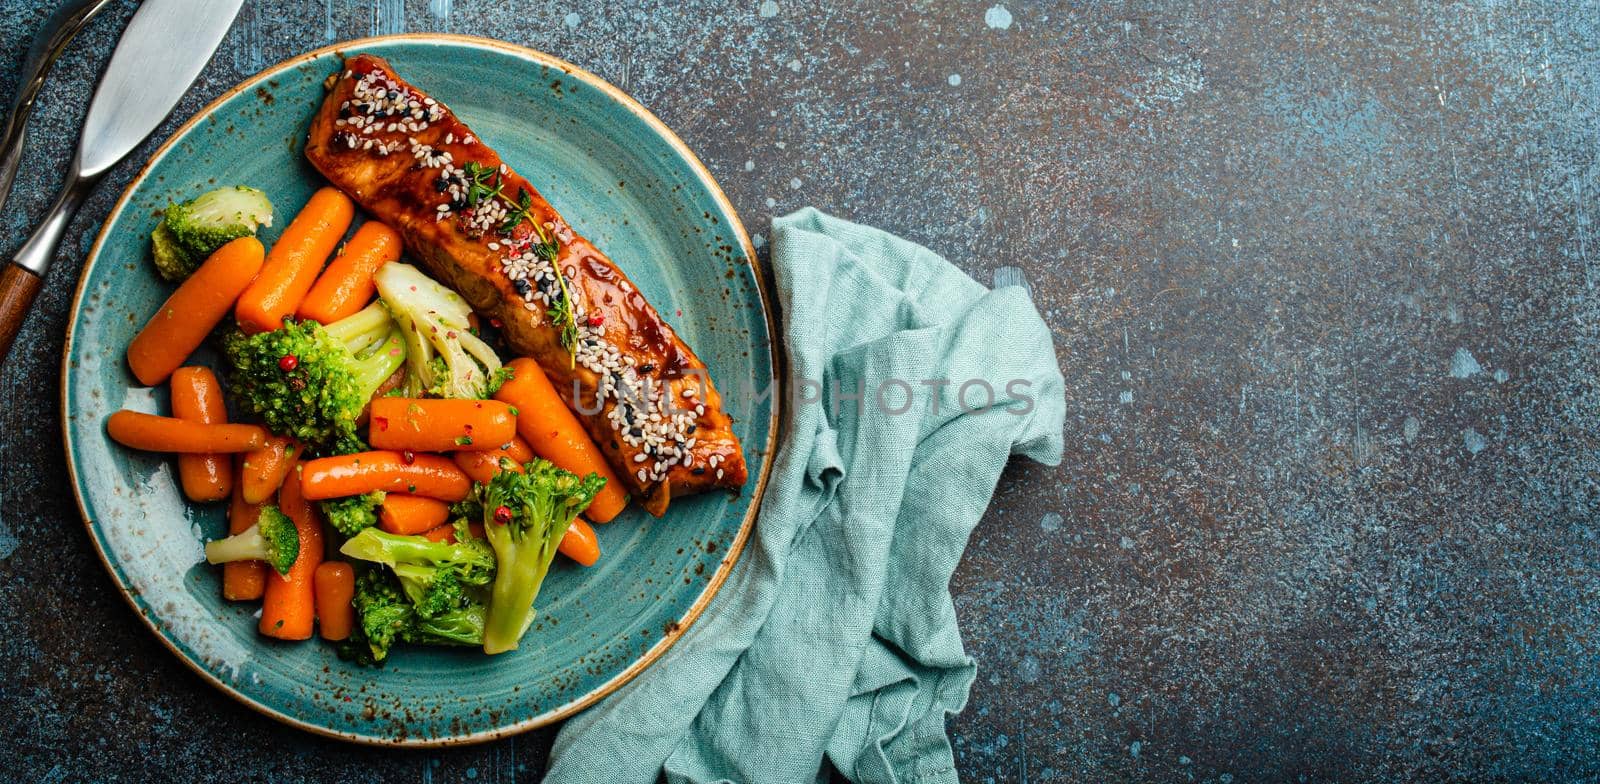 Grilled salmon fillet steak in teriyaki sauce with roasted vegetables carrot and broccoli on plate with fork and knife top view on rustic concrete background table, healthy eating, space for text